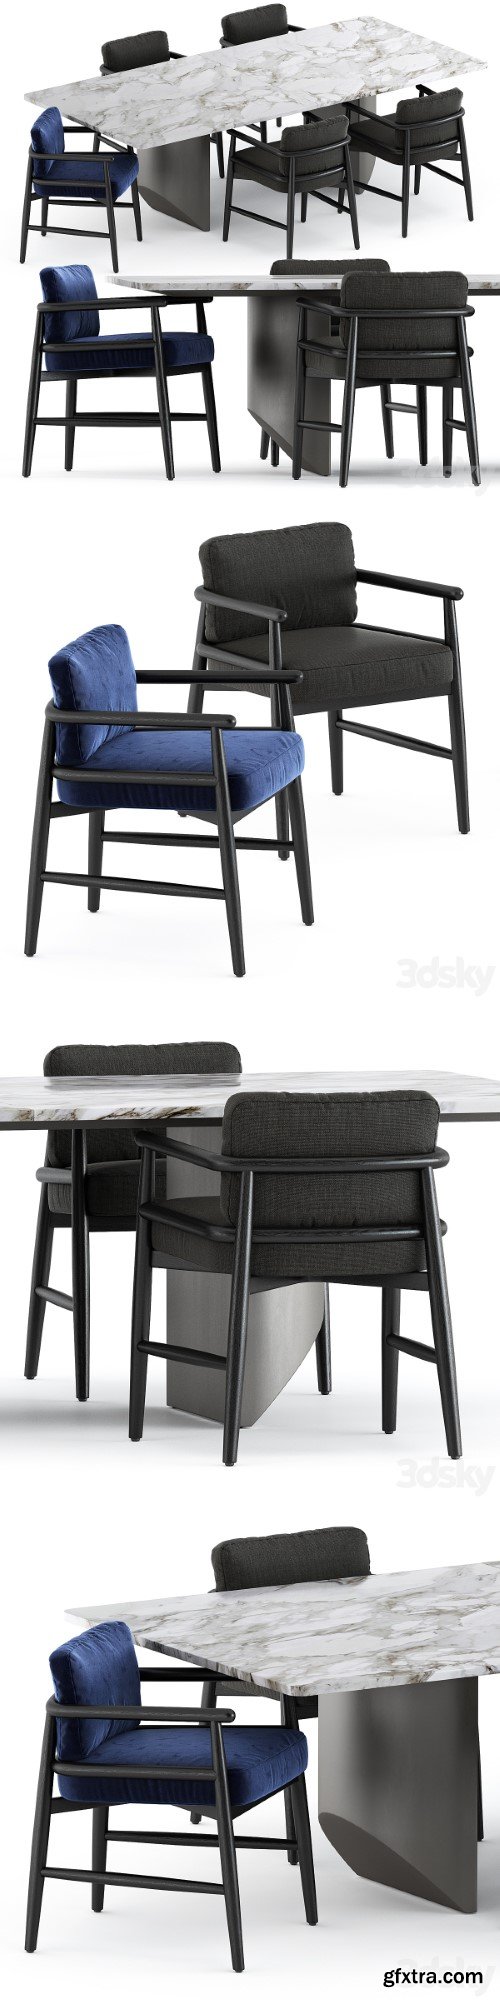 Teresina chair by Meridiani and Wedge Table by Minotti